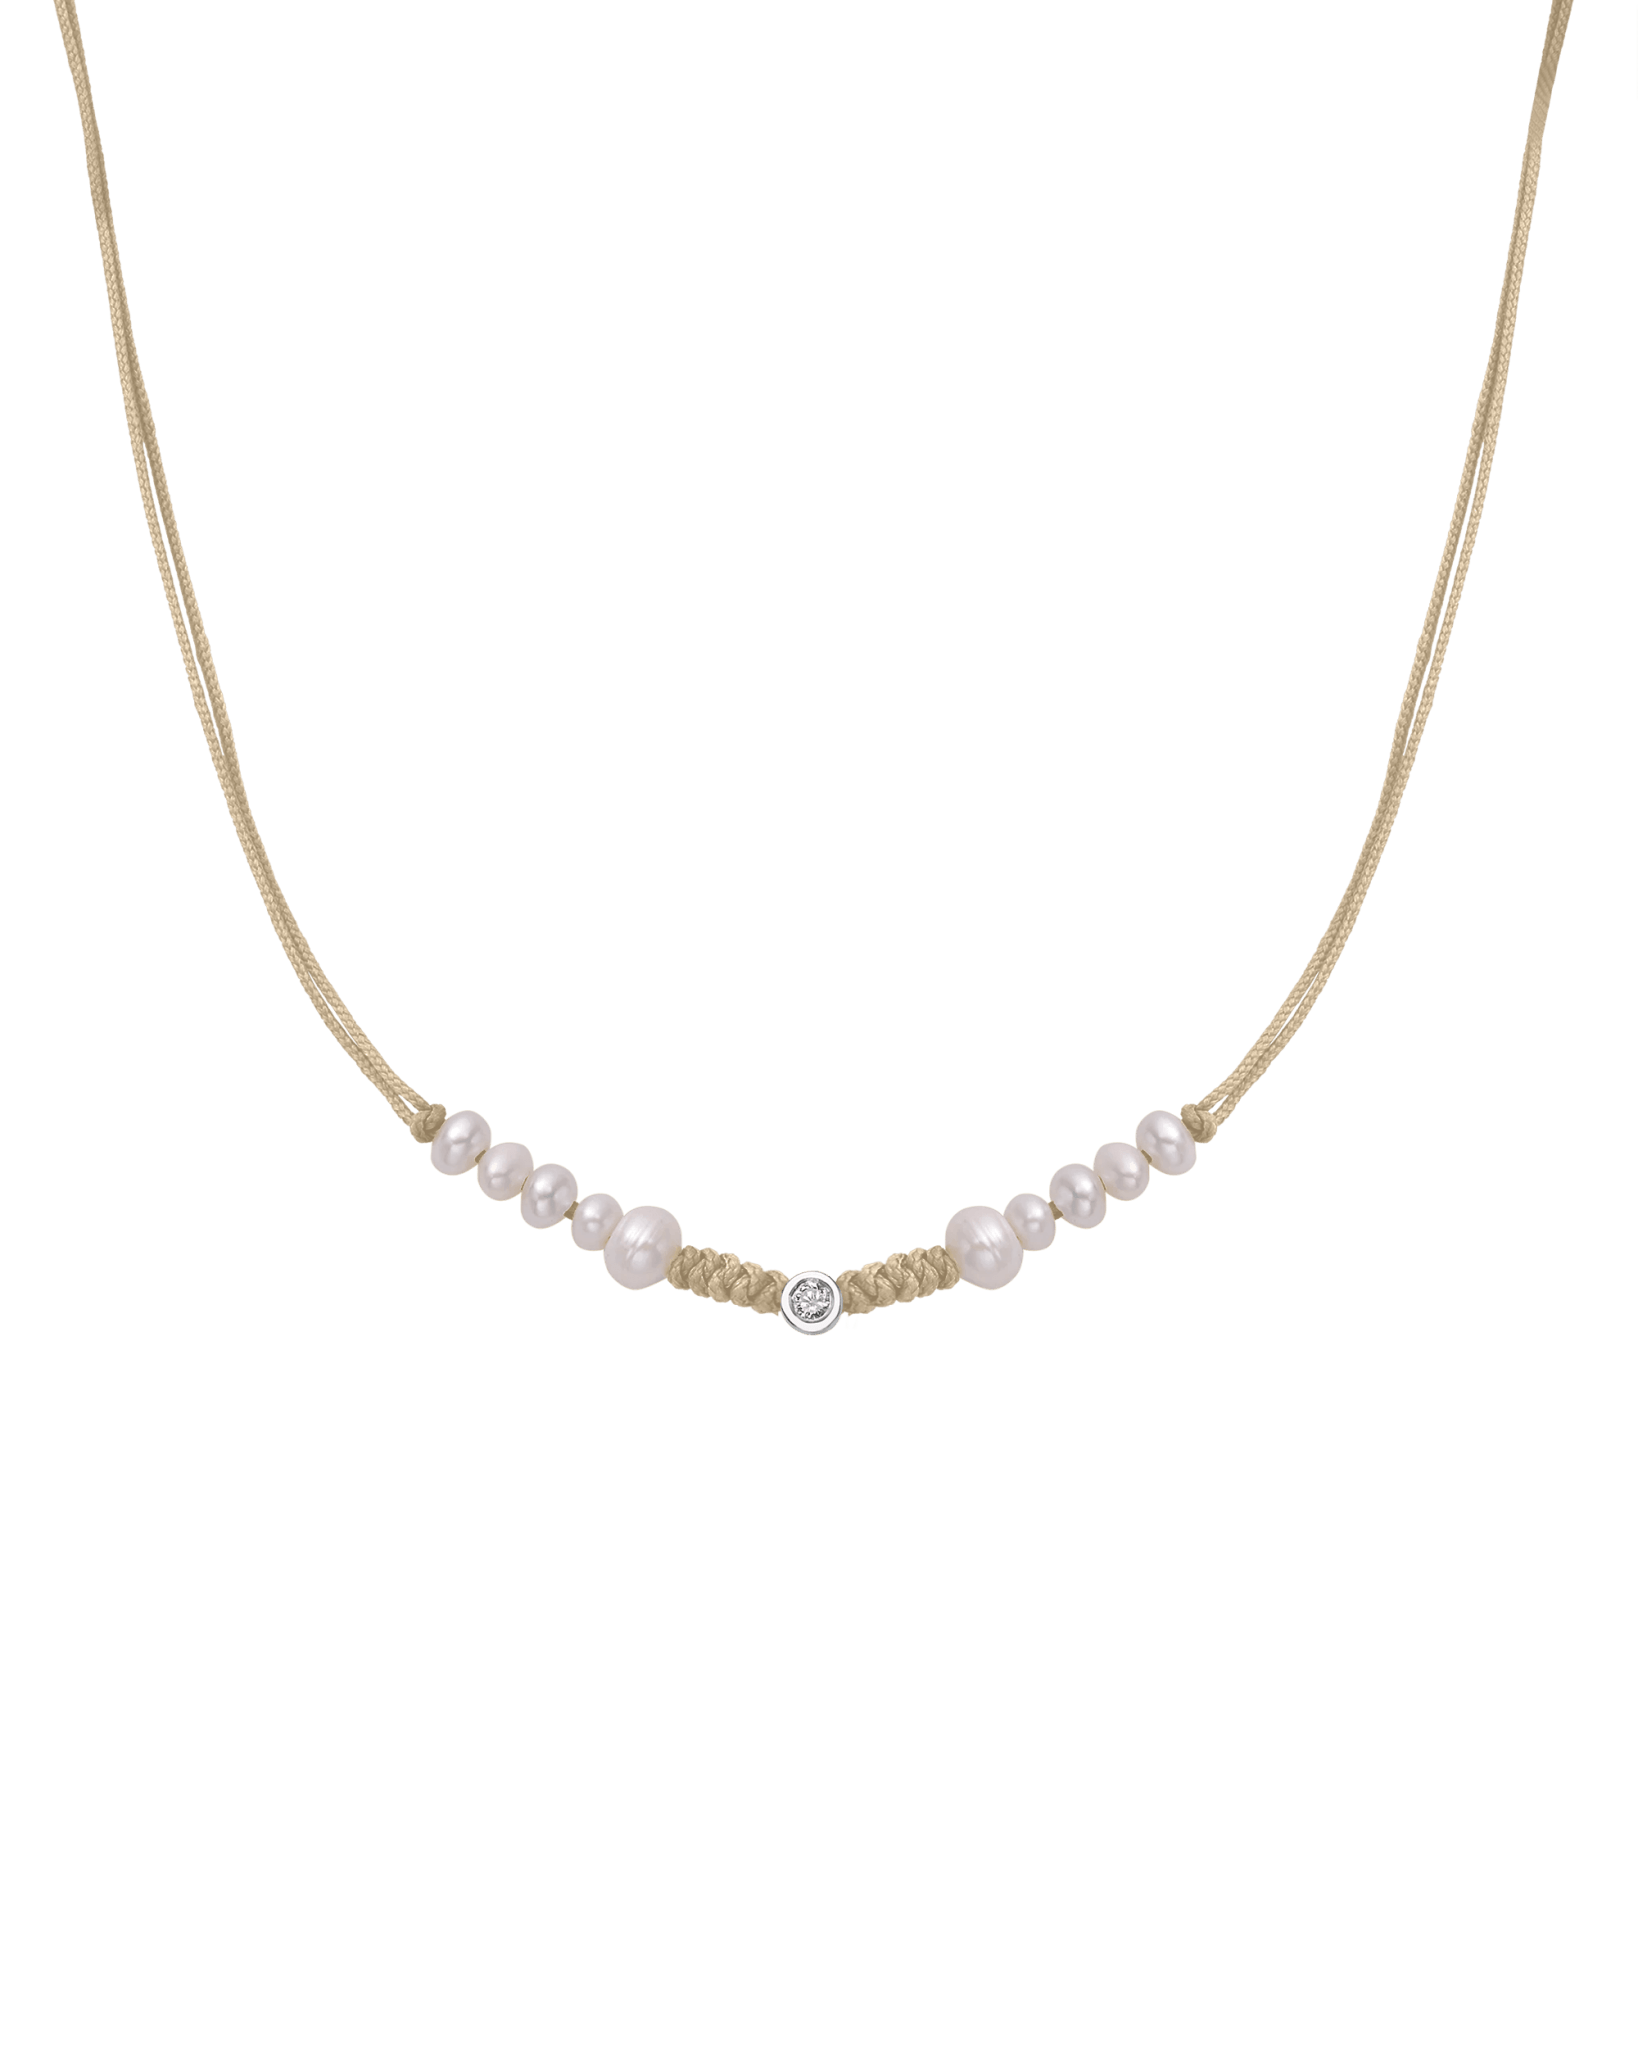 Ten Natural Pearl String of Love Necklace - 14K White Gold Necklaces 14K Solid Gold Beige Medium: 0.04ct 